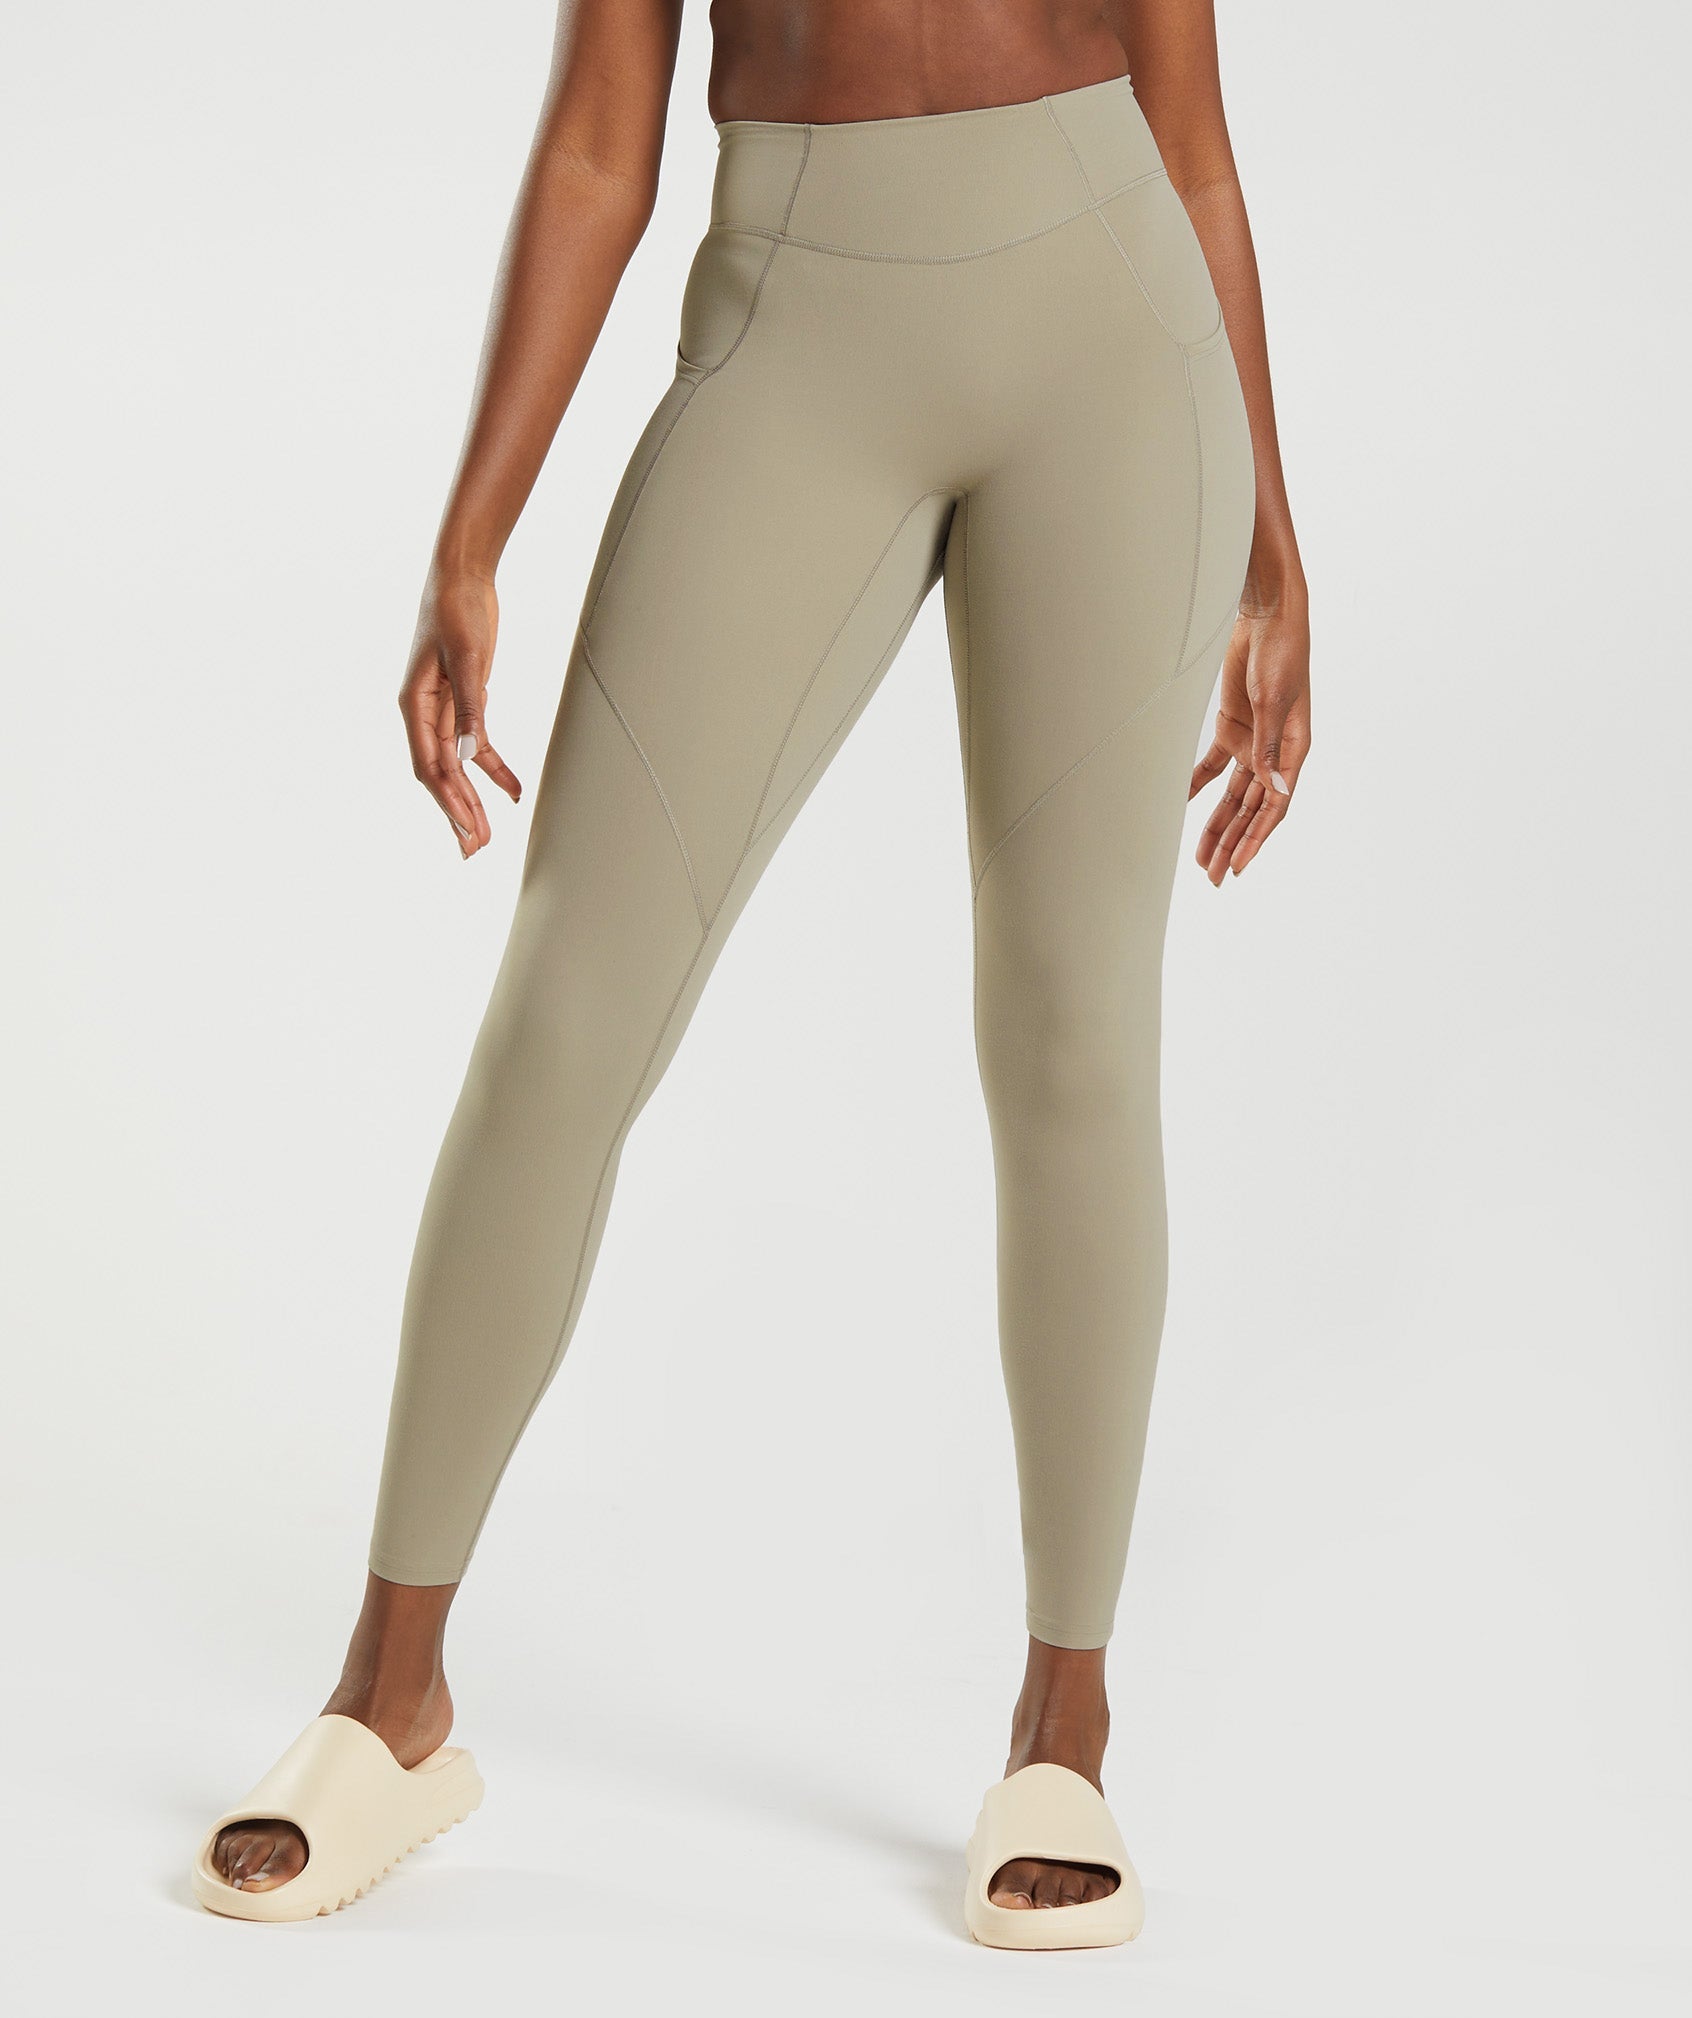 Whitney Everyday Pocket Leggings in Cement Brown - view 6